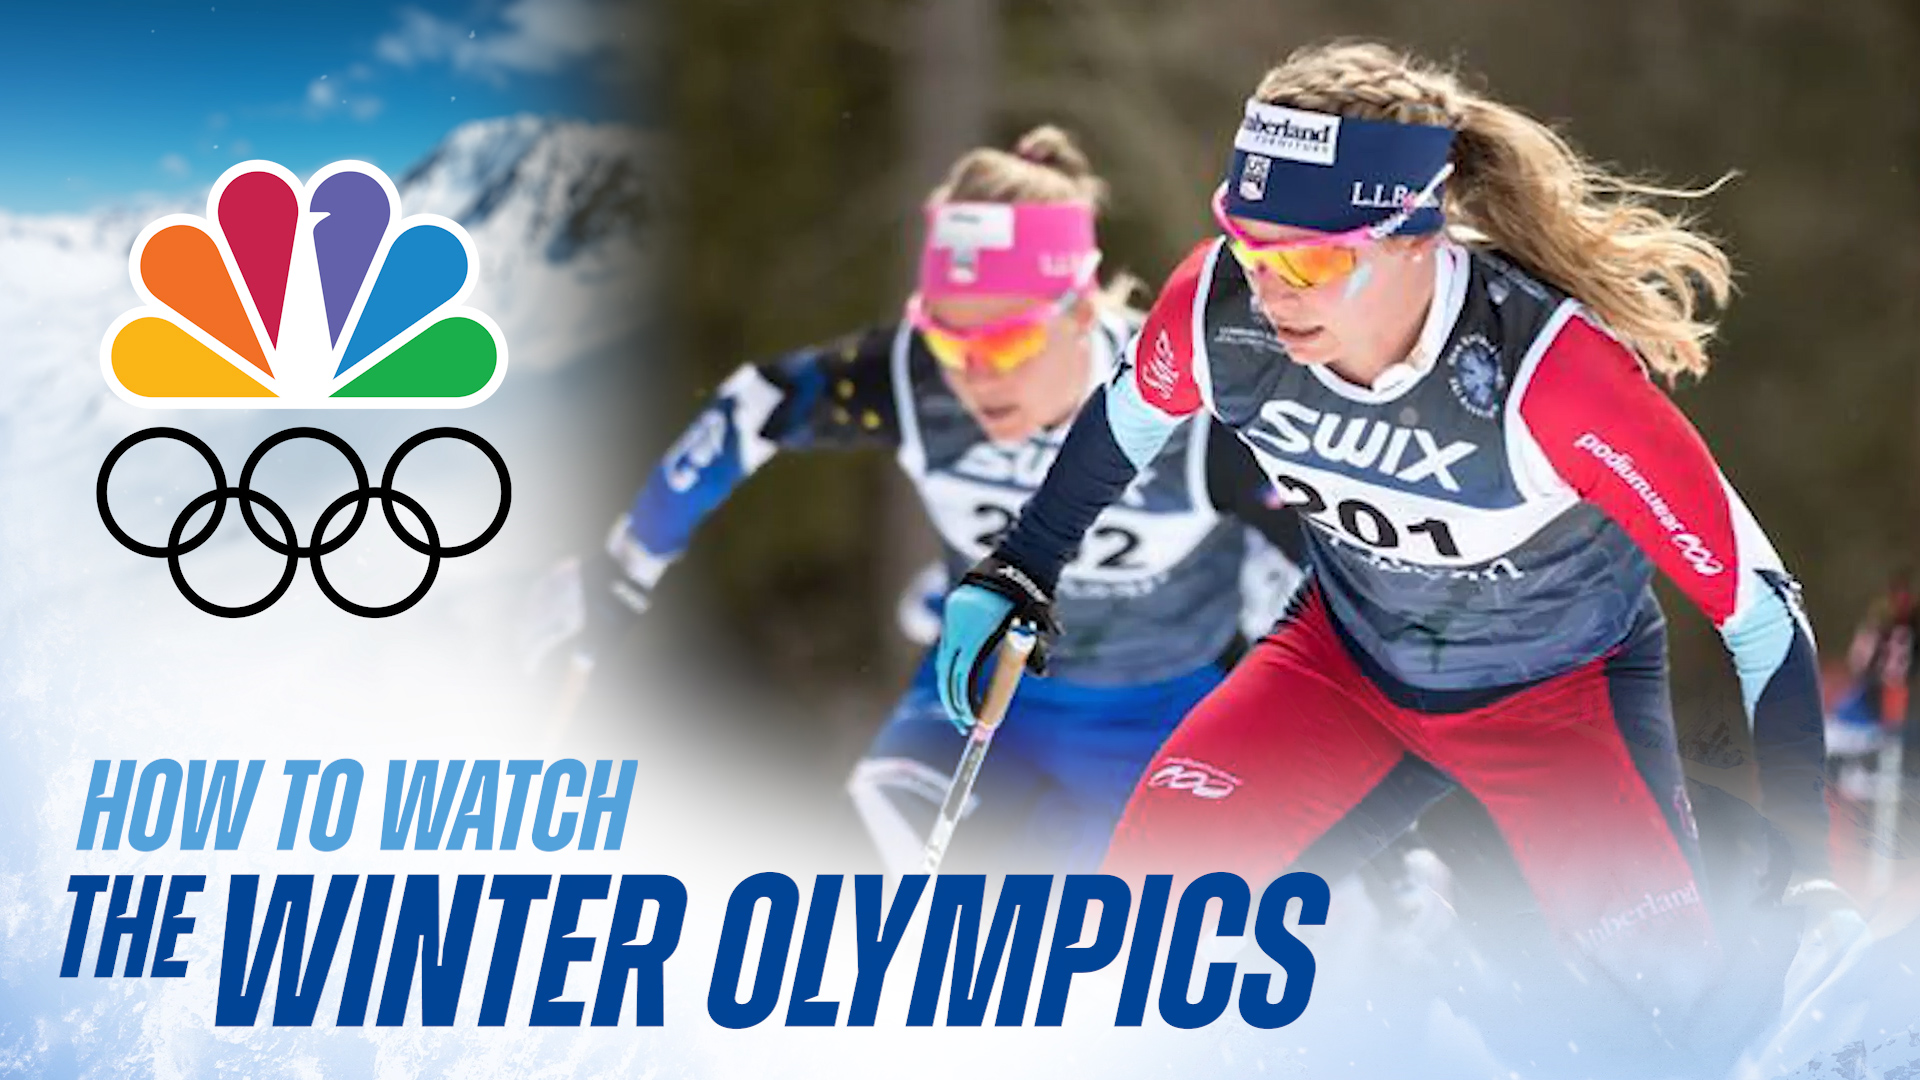 Winter Olympics How to Watch the Opening Ceremony, Cross-Country Skiing and More